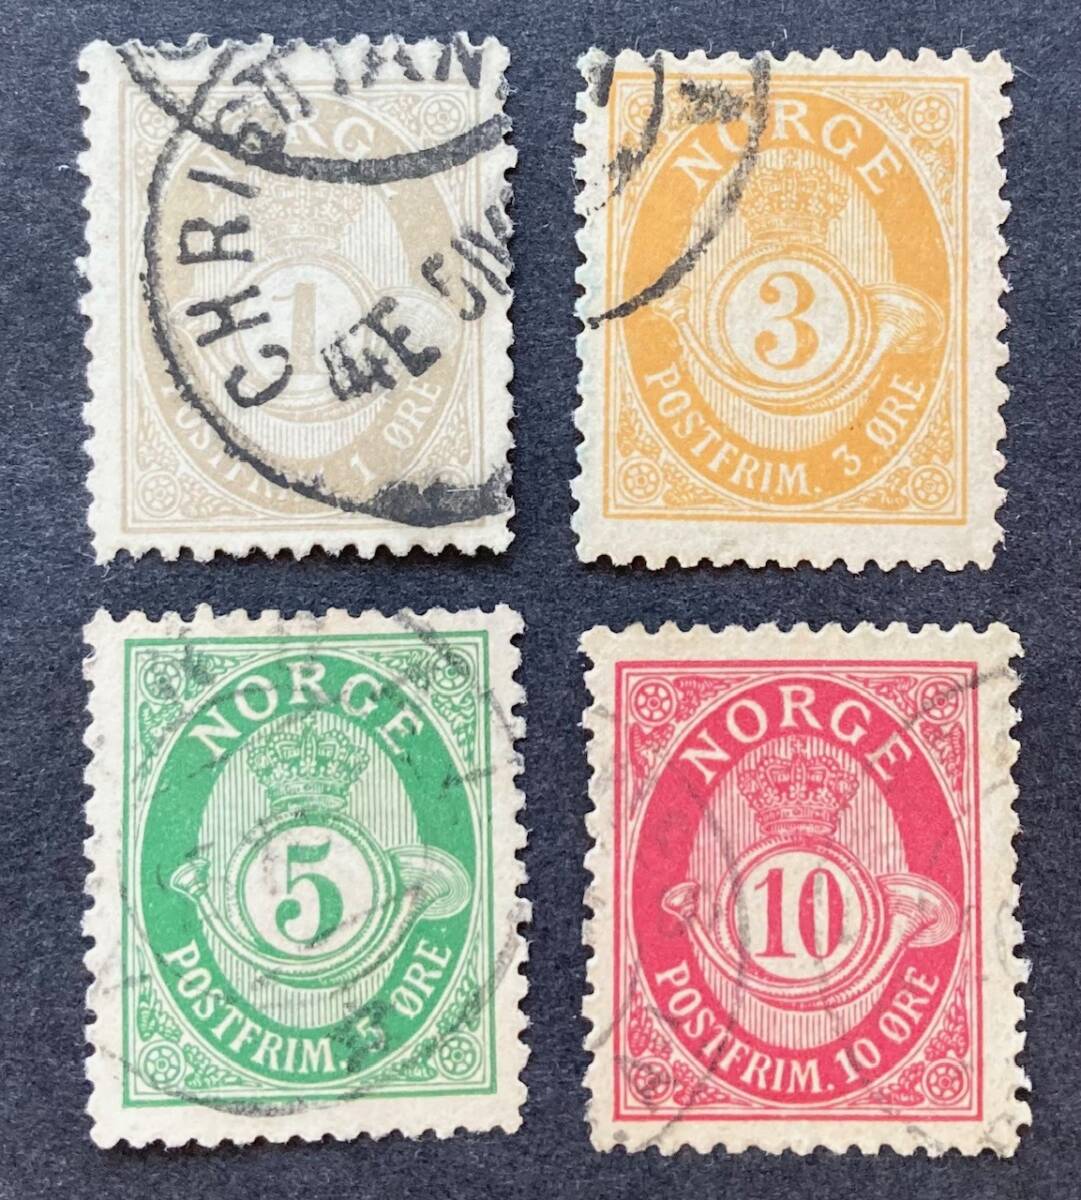 [noru way ]1893-1927 year issue : ordinary stamp ( country name selif have + horn navy blue 7.. image )22 kind used superior article ~ beautiful goods 